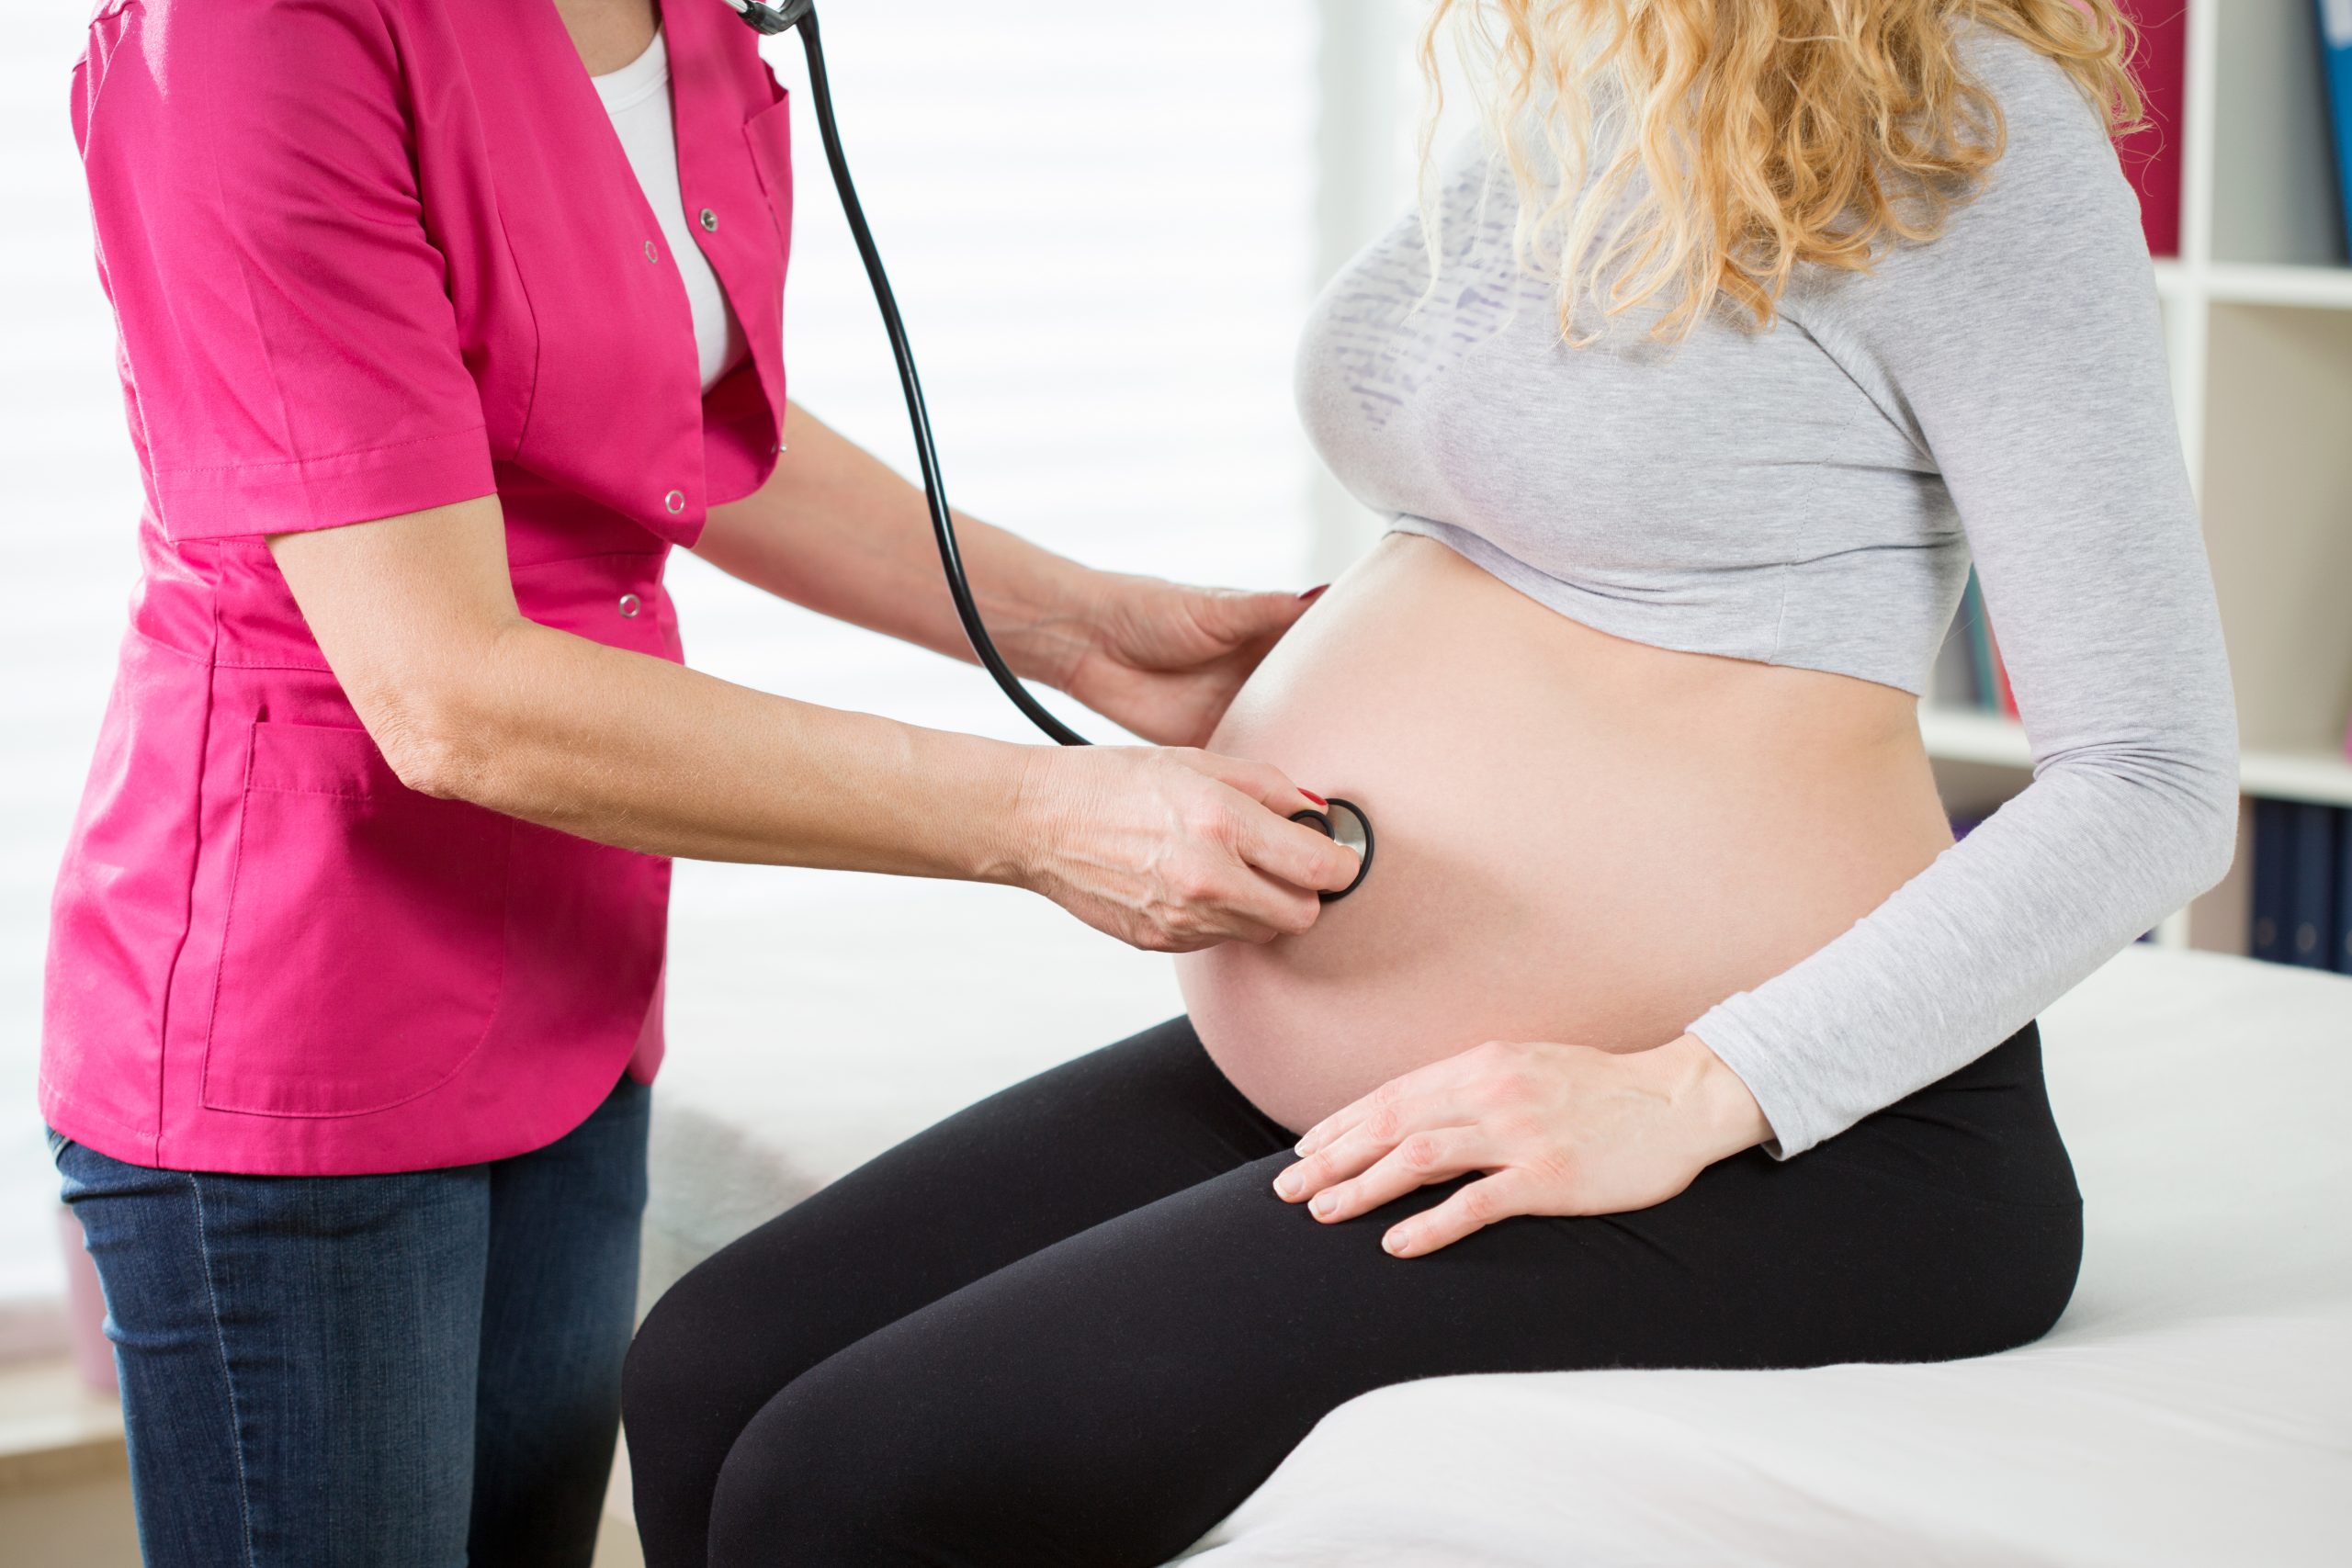 Subclinical hypothyroidism in pregnancy, is it a real risk?